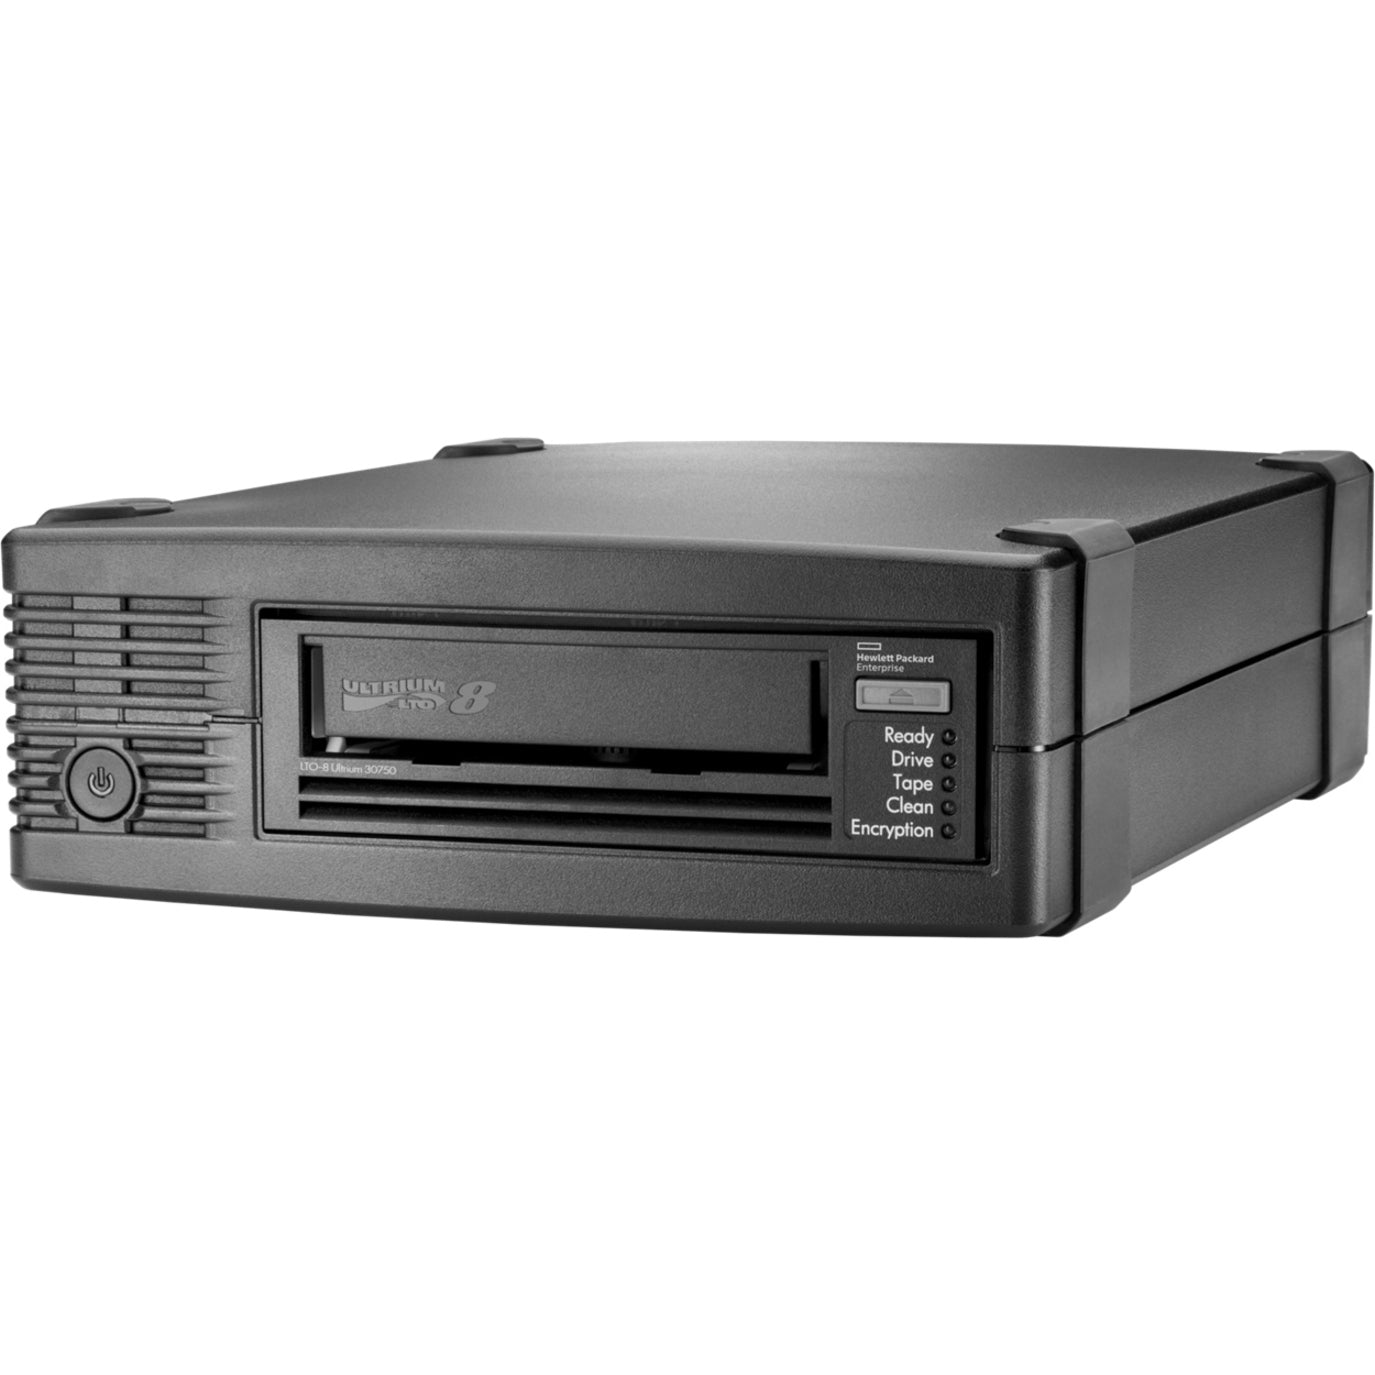 HPE StoreEver LTO-6 Ultrium 6250 Internal Tape Drive, 2.5TB Native Capacity, 6.25TB Compressed Capacity